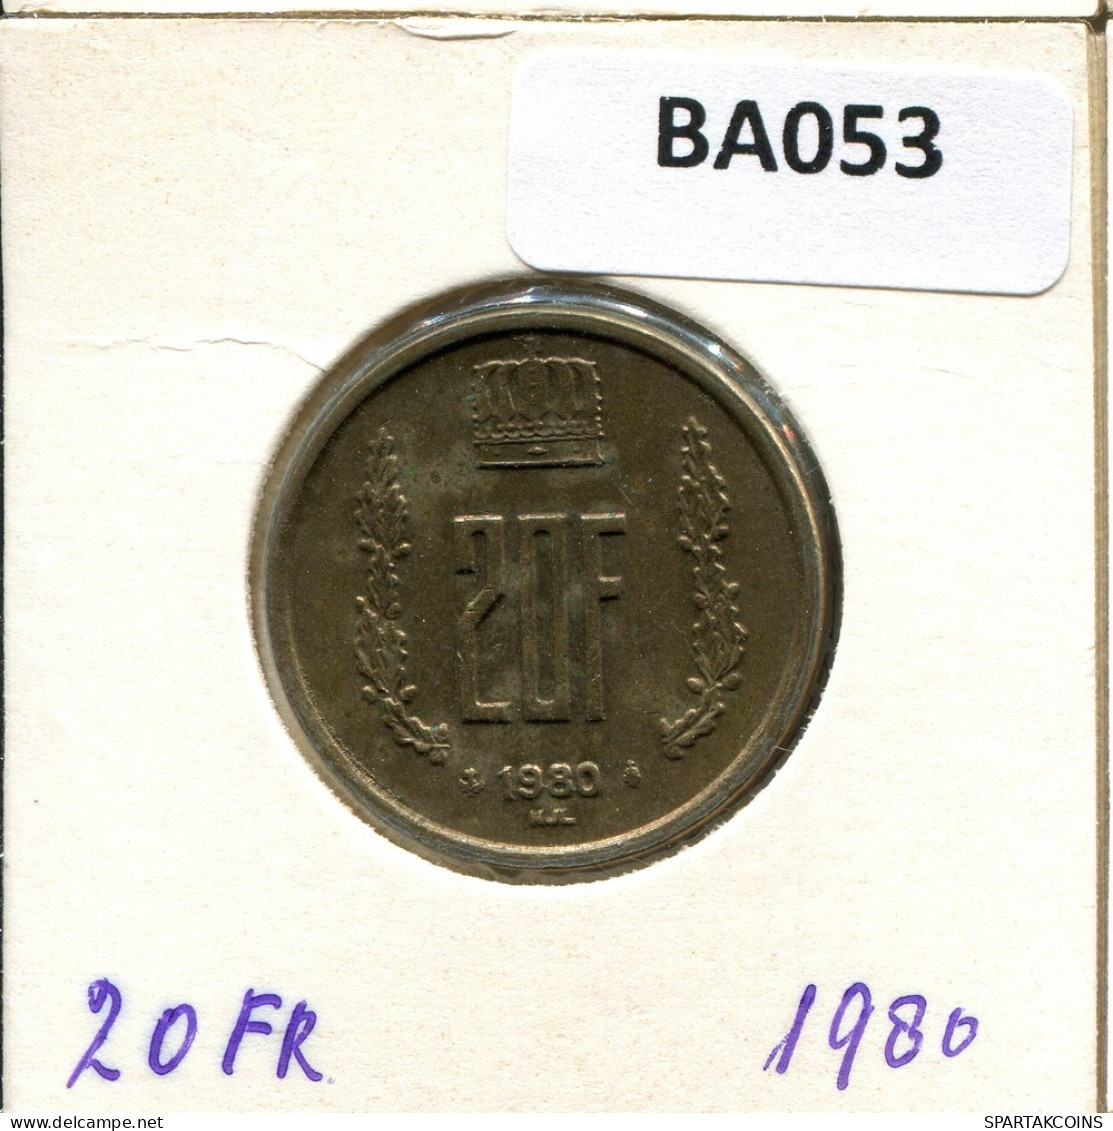 20 FRANCS 1980 LUXEMBURG LUXEMBOURG Münze #BA053.D.A - Luxembourg